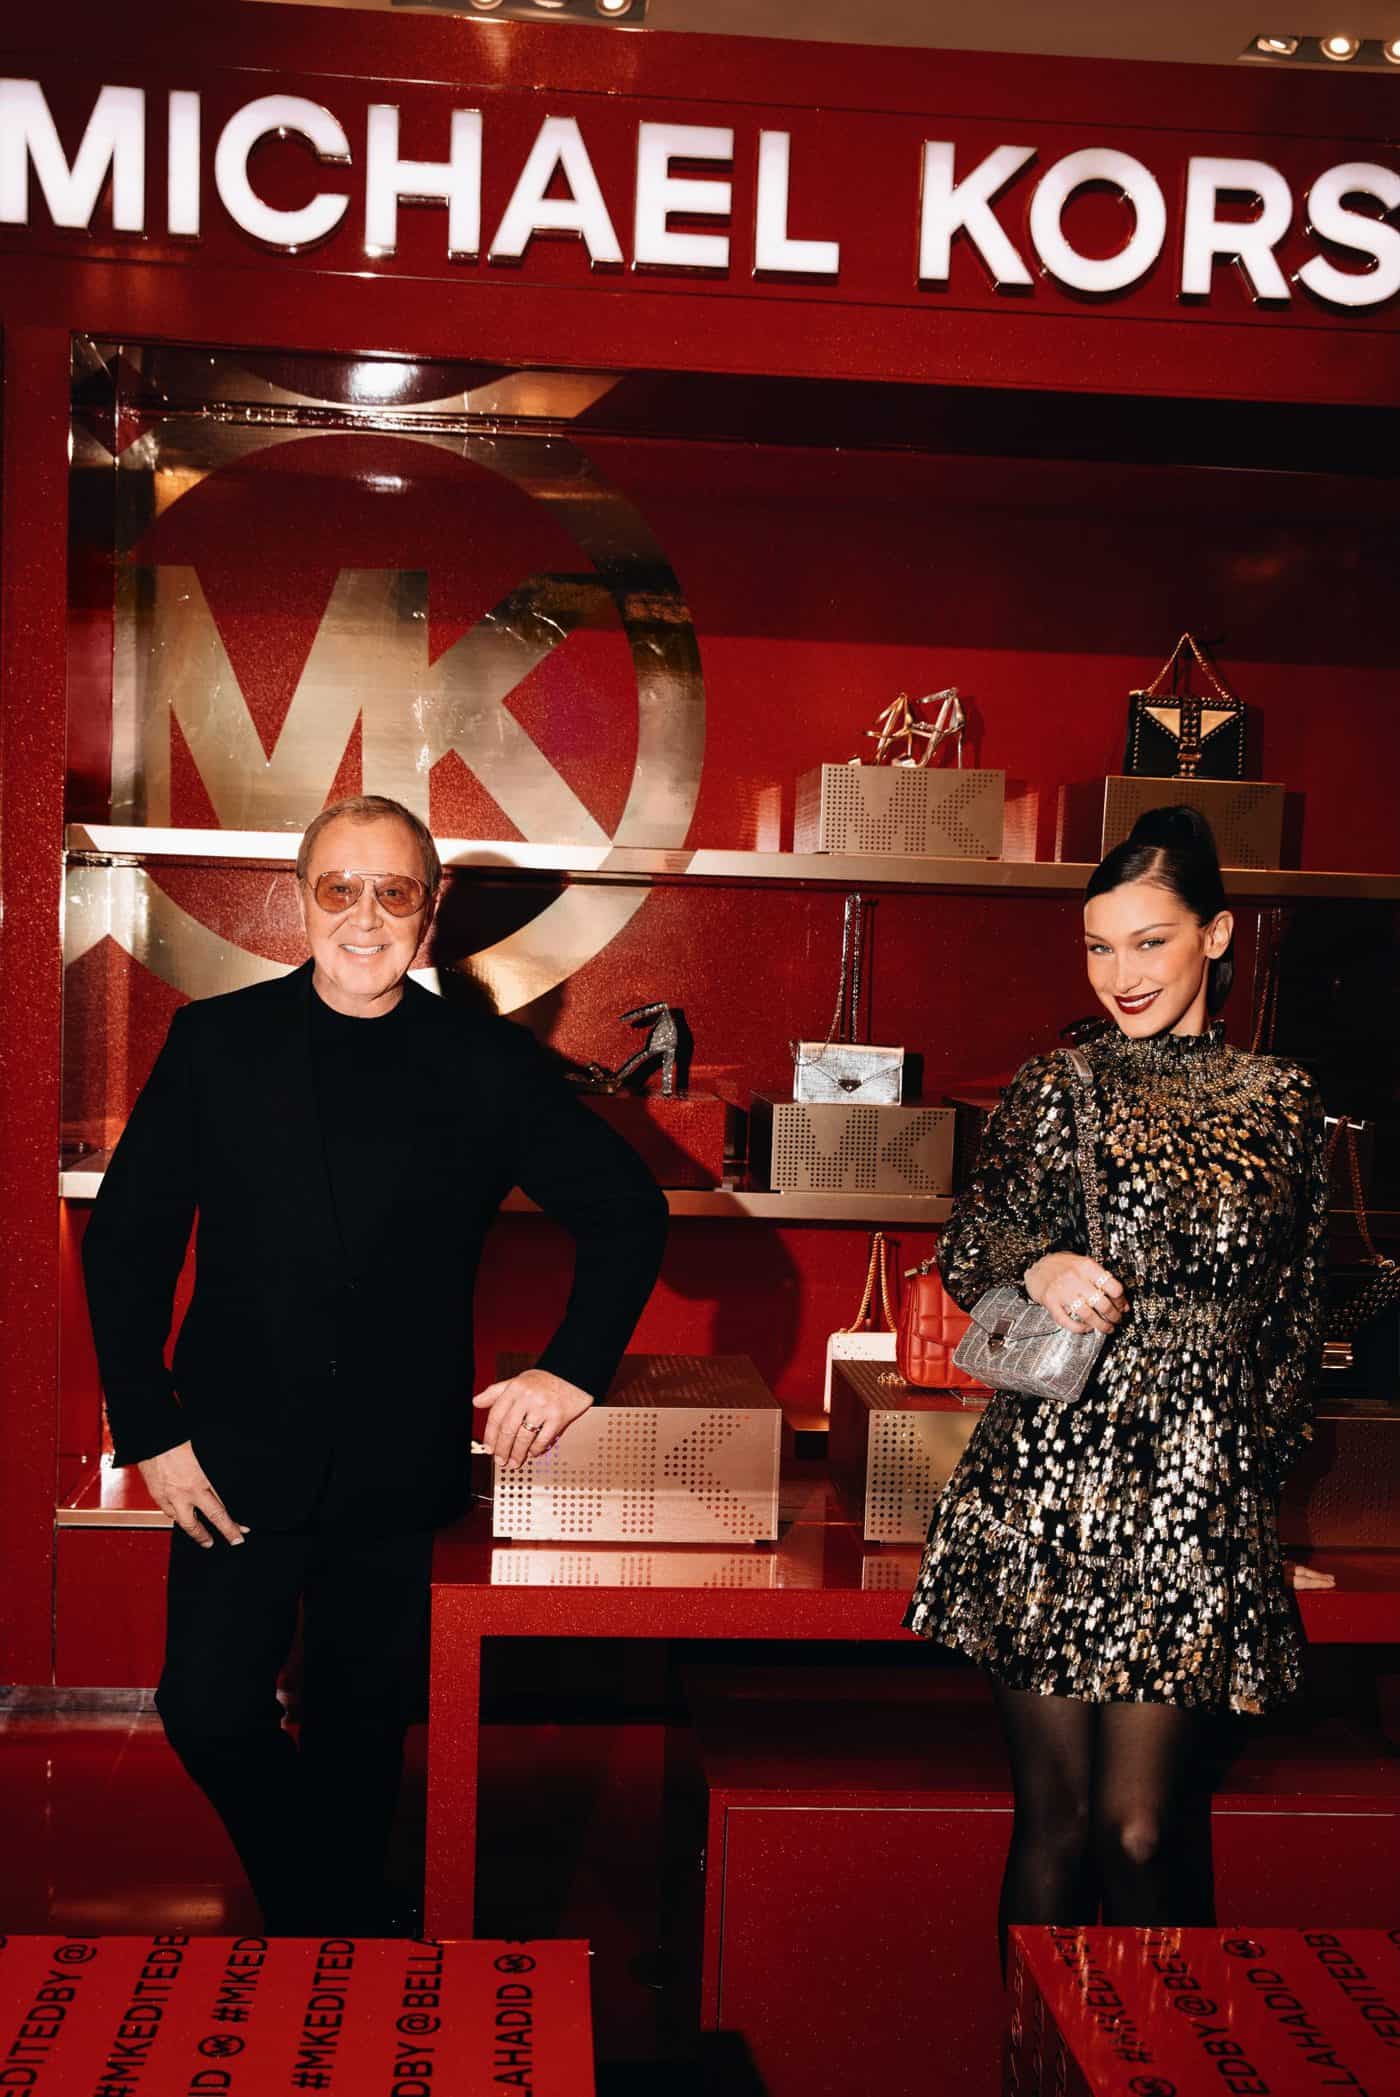 Bella Hadid Now Has Her Own Michael Kors Pop-Up at Macy's - Daily Front Row